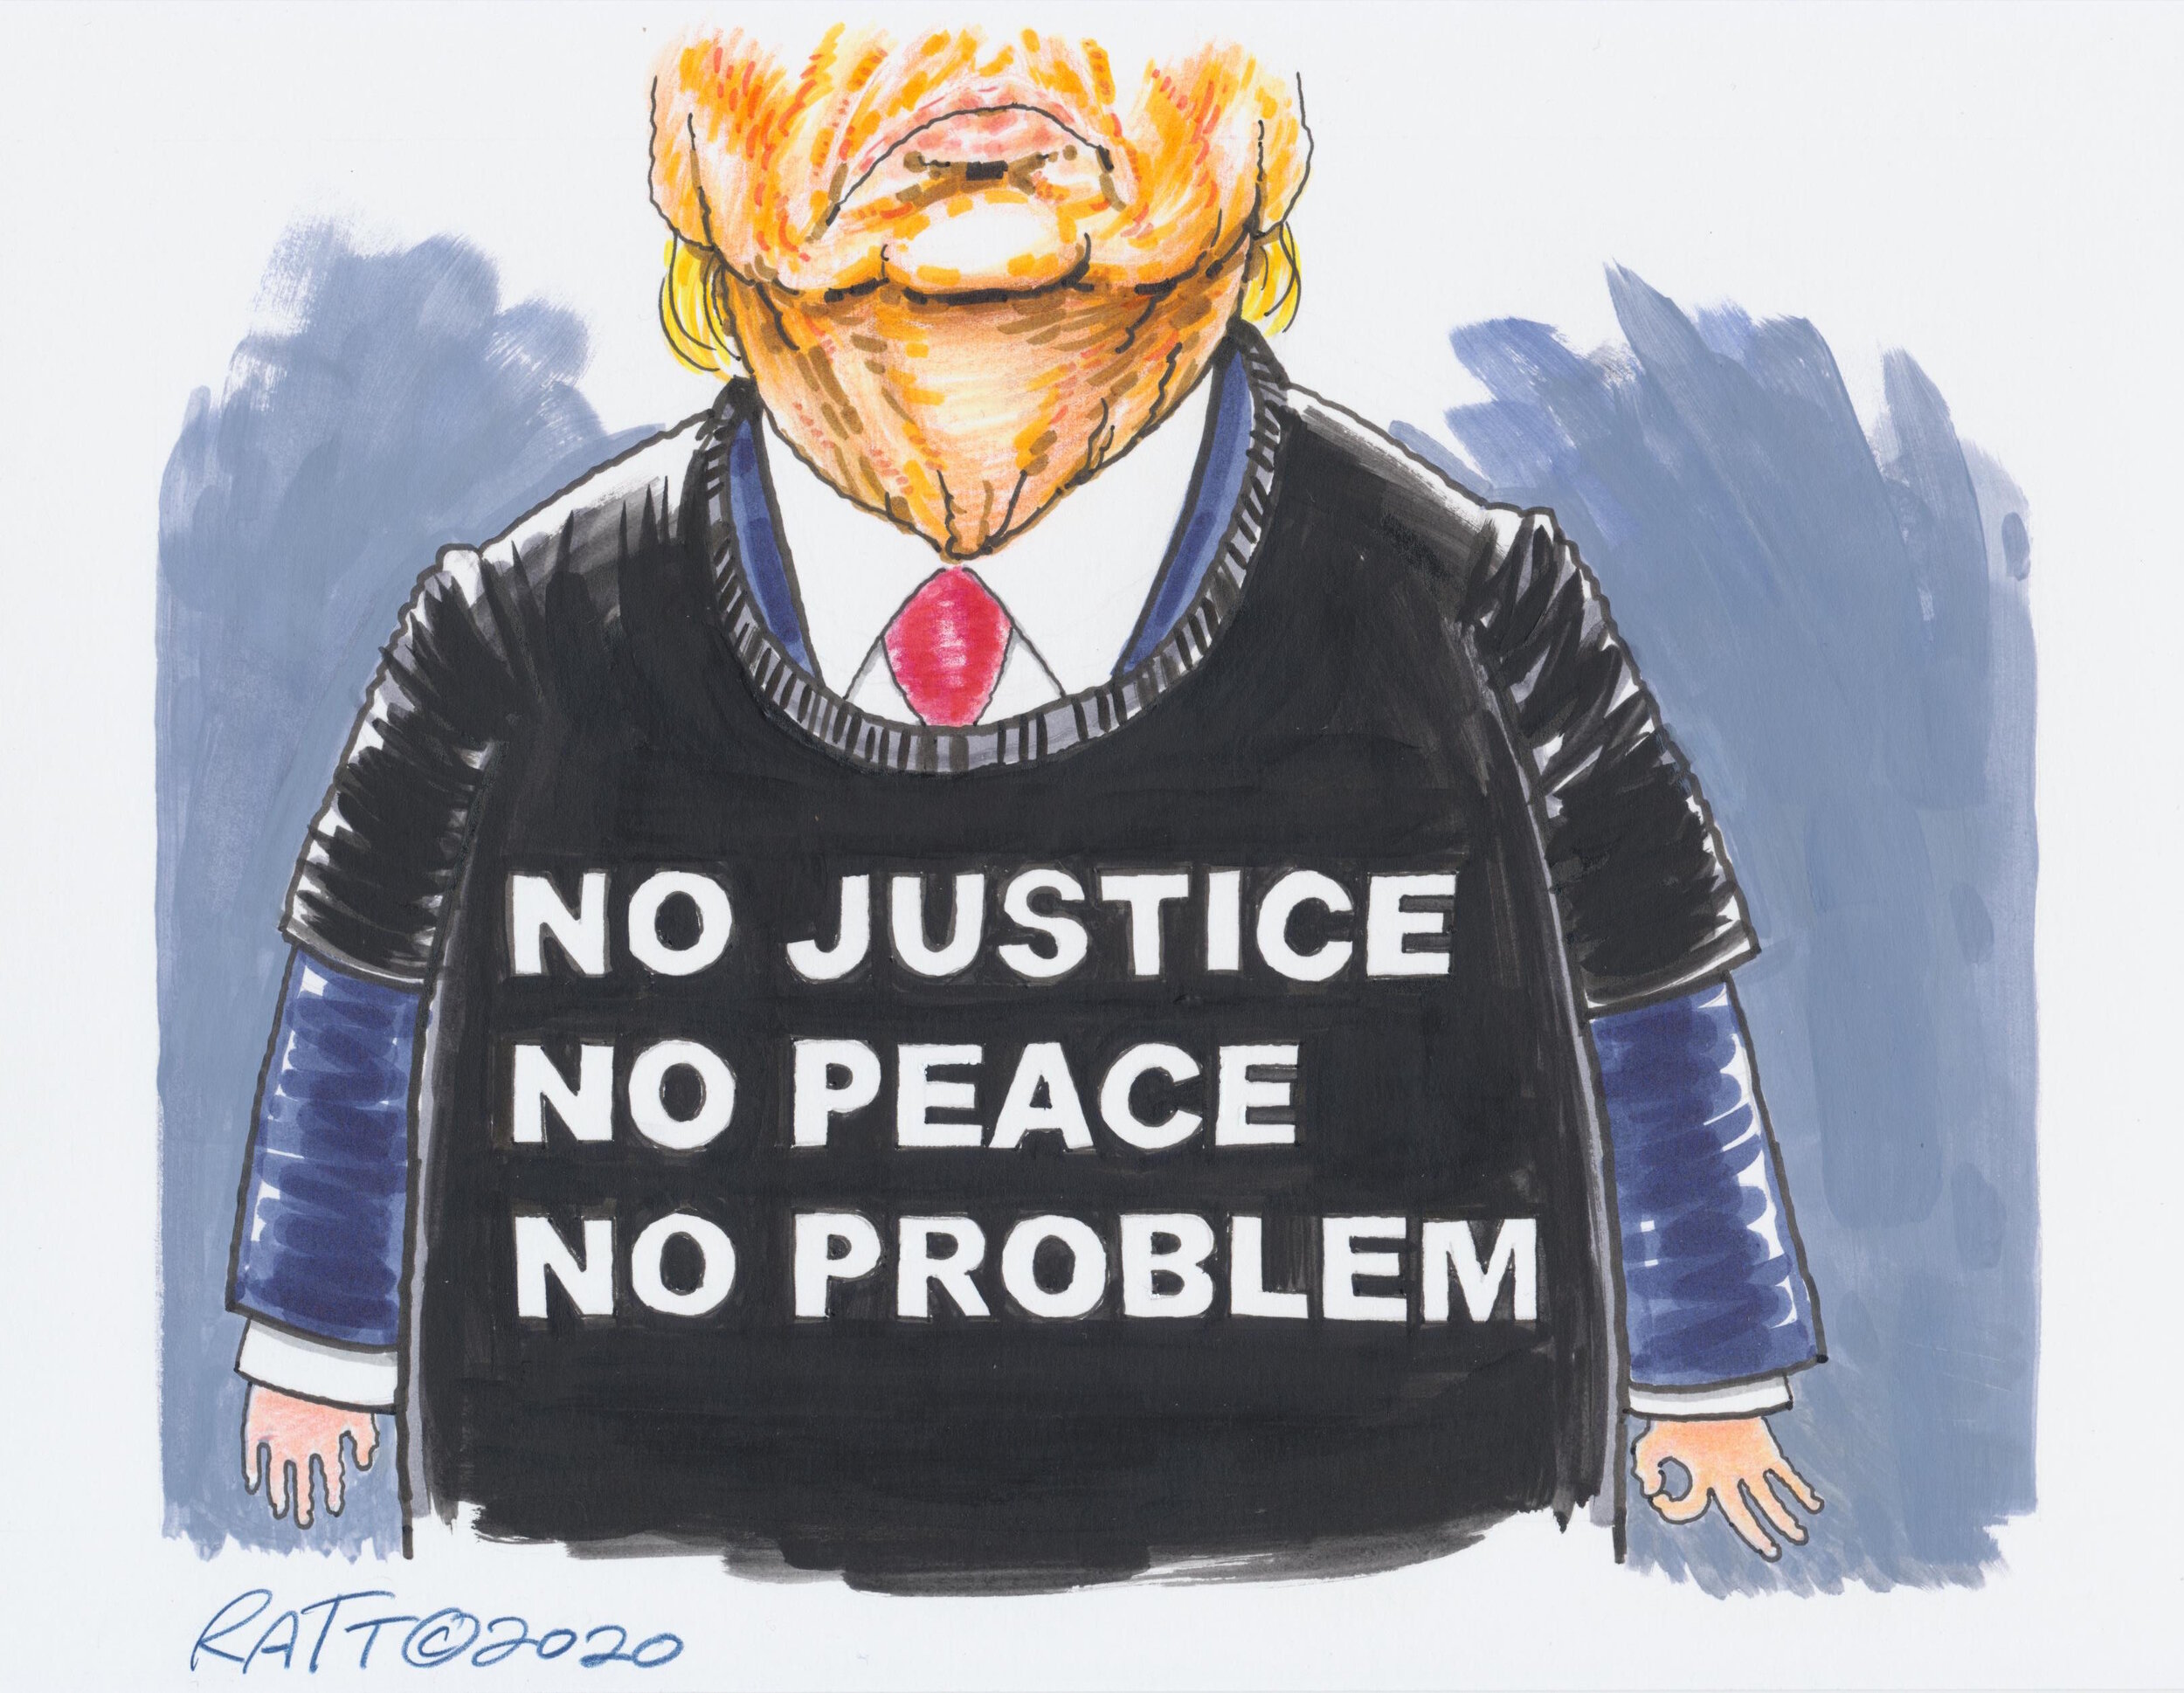   No problem for him.  (The Rule of Law This Week, June 14, 2020.)  